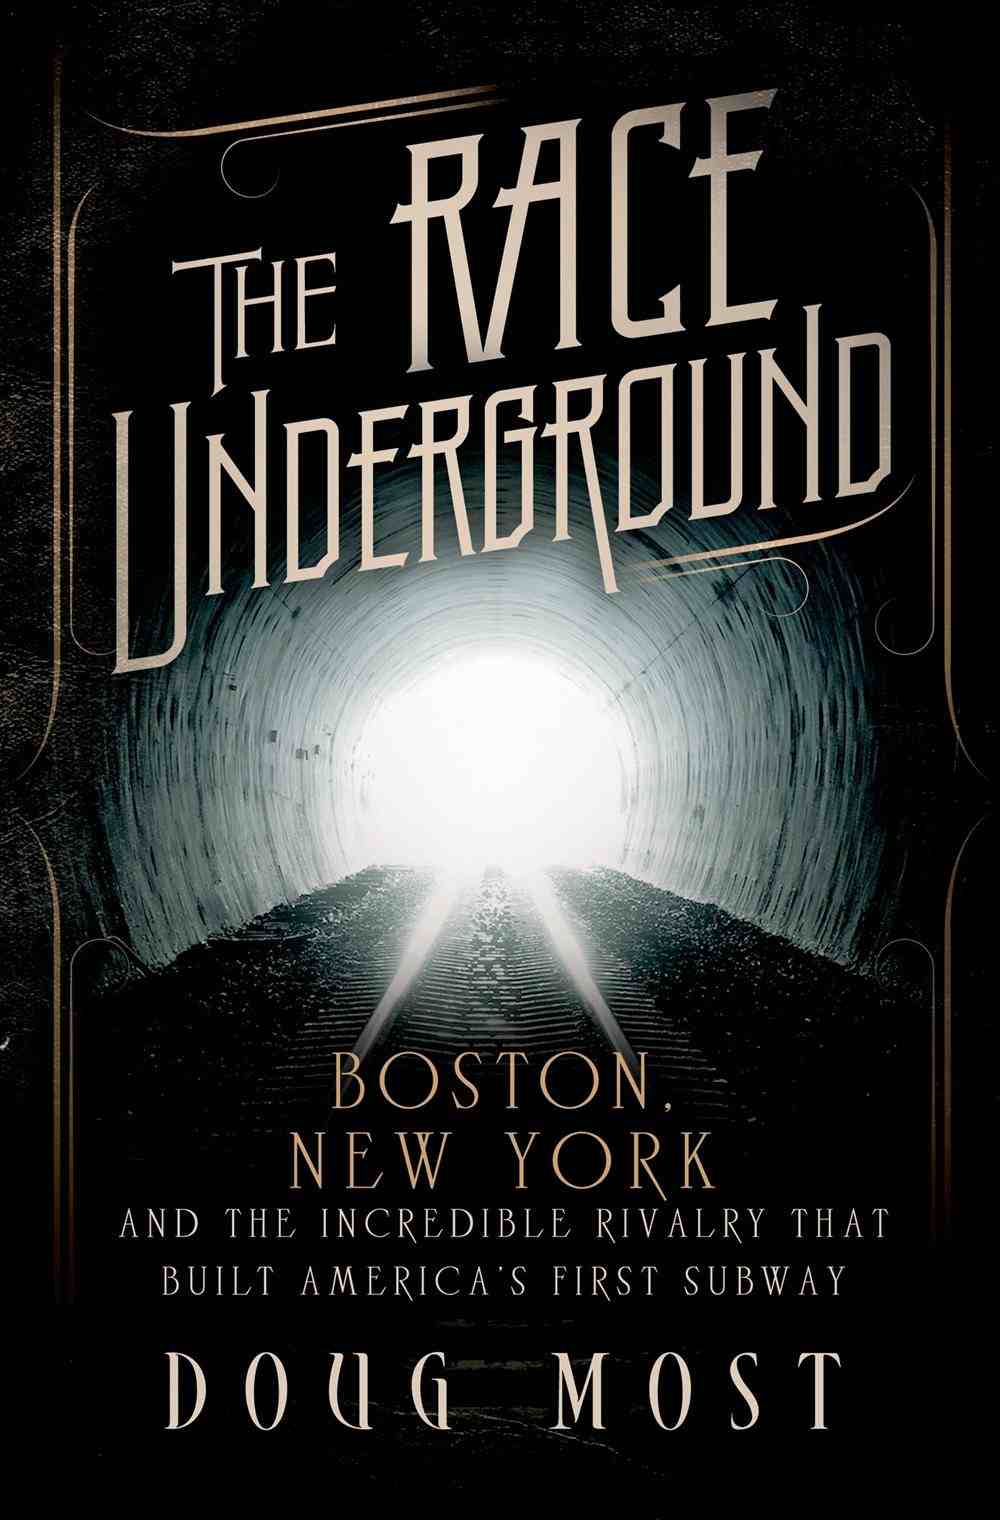 The Race Underground: Boston, New York, and the Incredible Rivalry that Built America’s First Subway